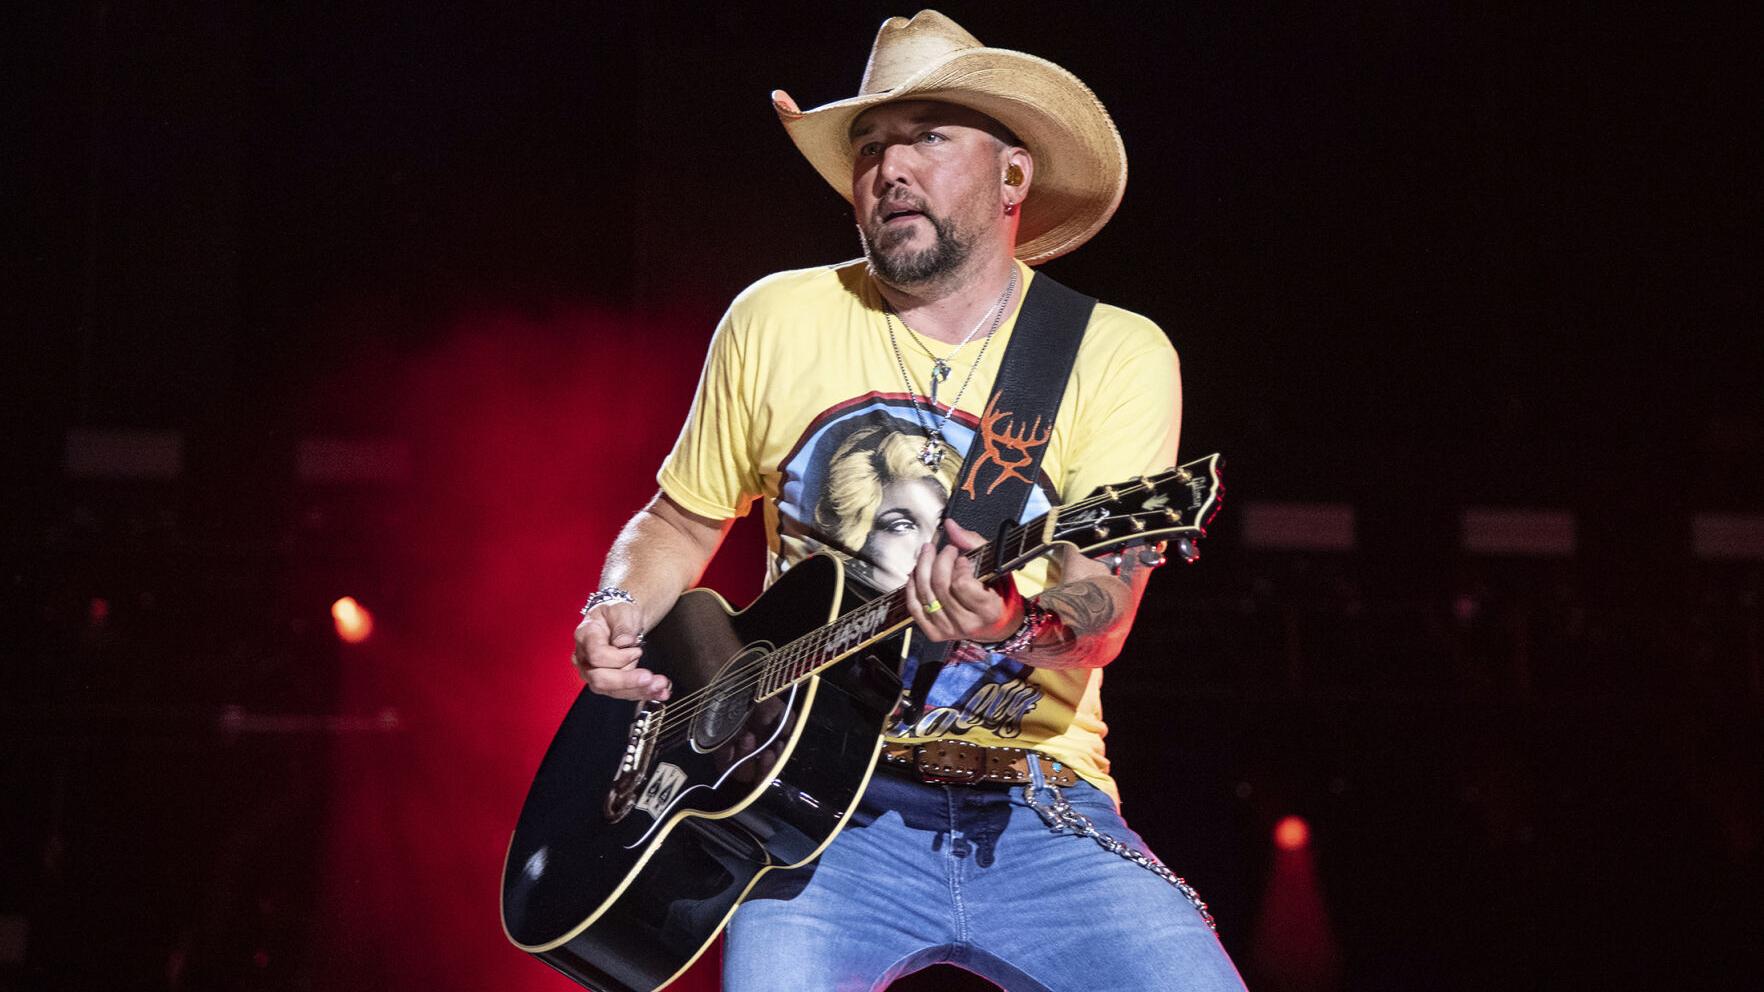 CMT pulls video for Jason Aldean's controversial song, Trump target